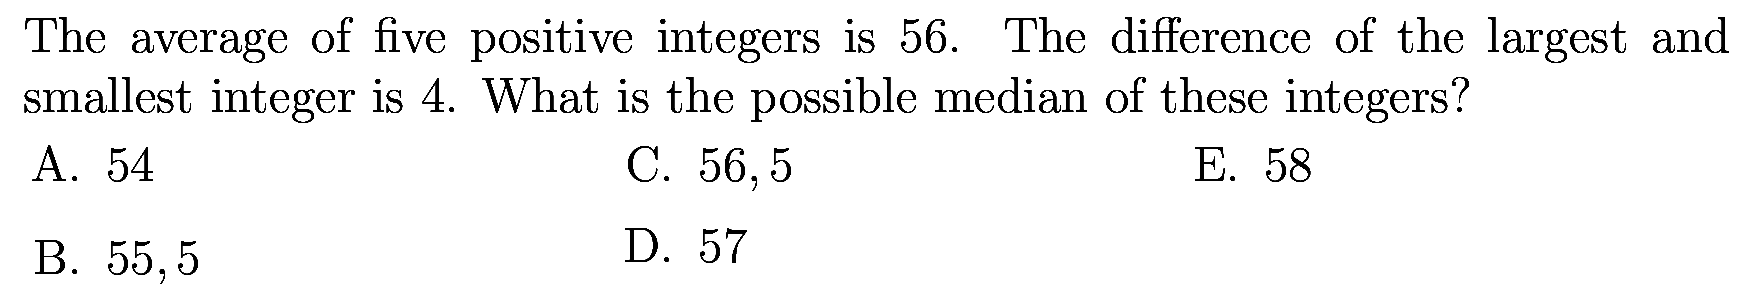 The average of five positive integers is 56. The difference of the largest and smallest integer is 4. What is the possible median of these integers?